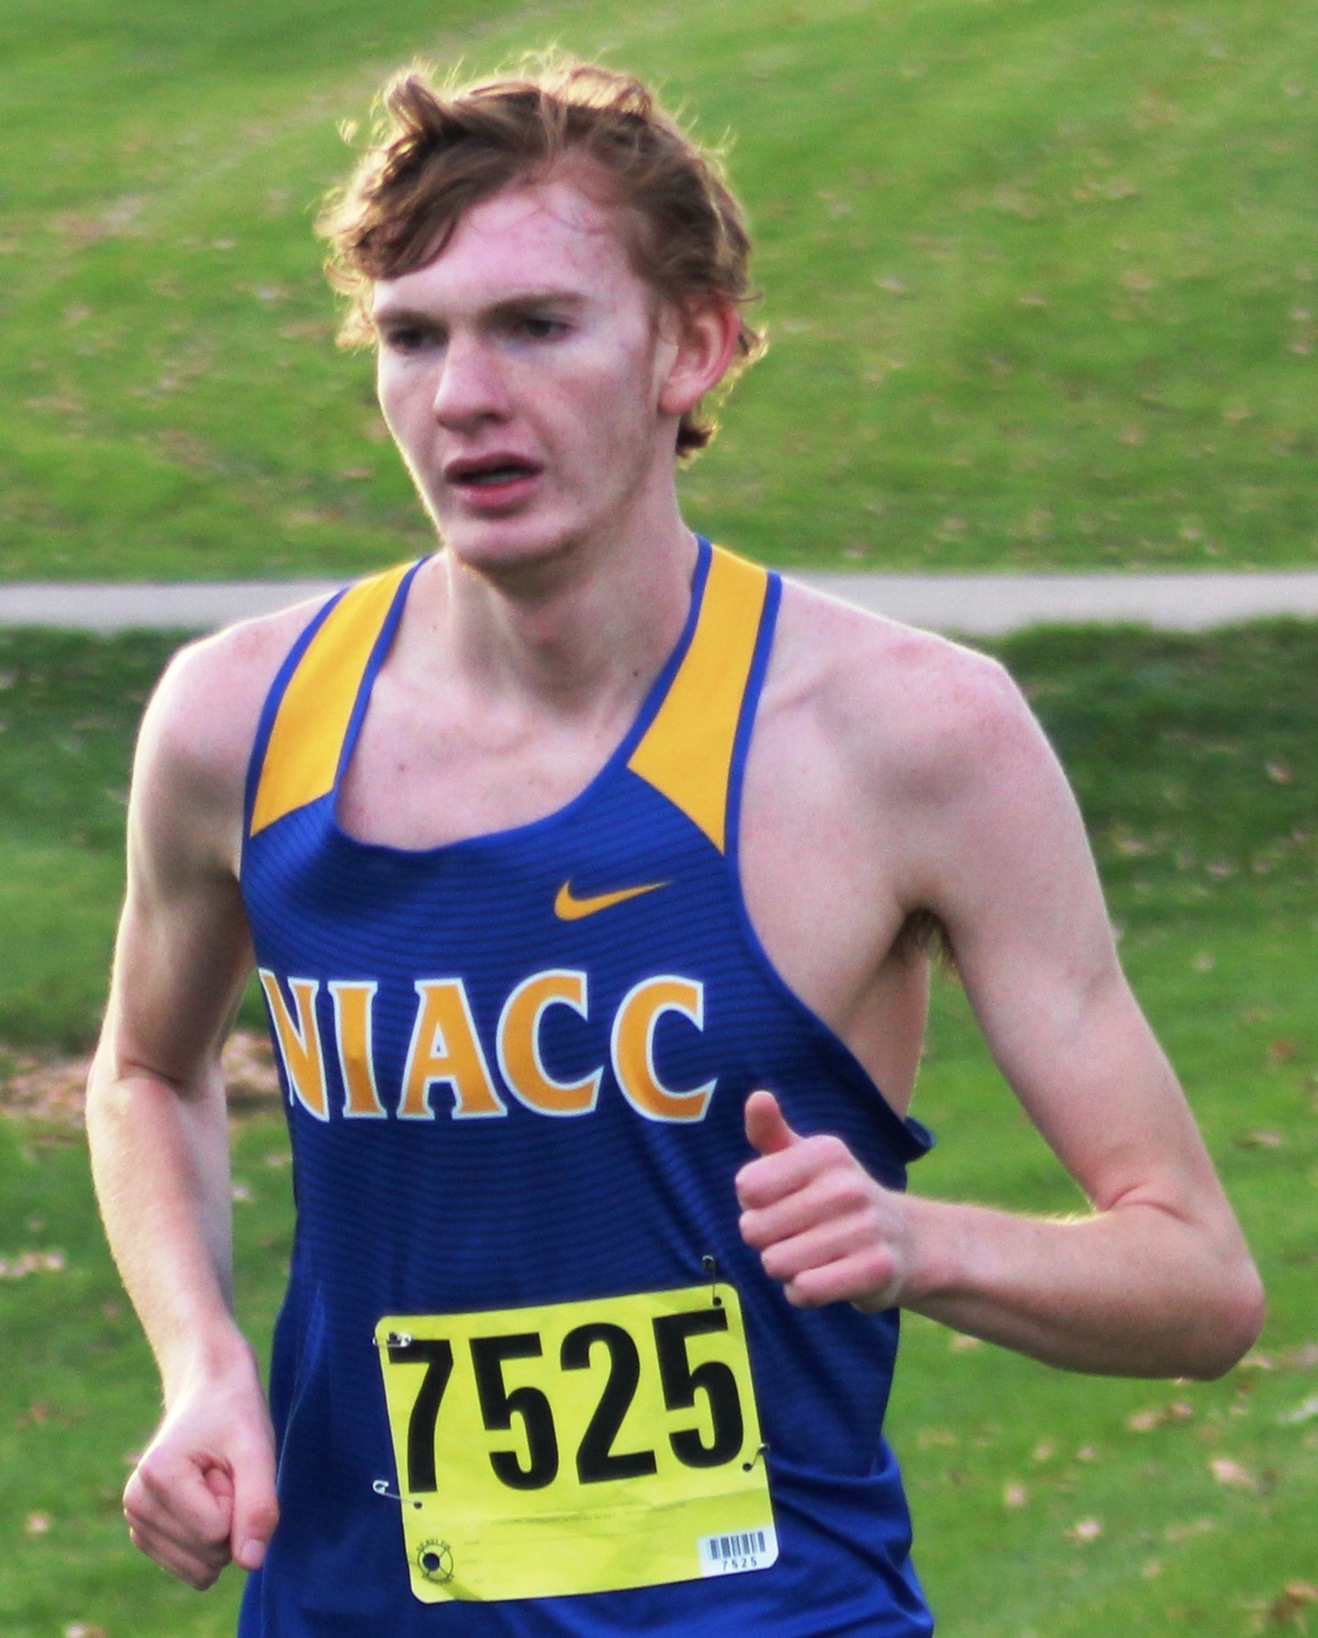 NIACC freshman Sam Pedelty races at the regional meet in October in Bettendorf.